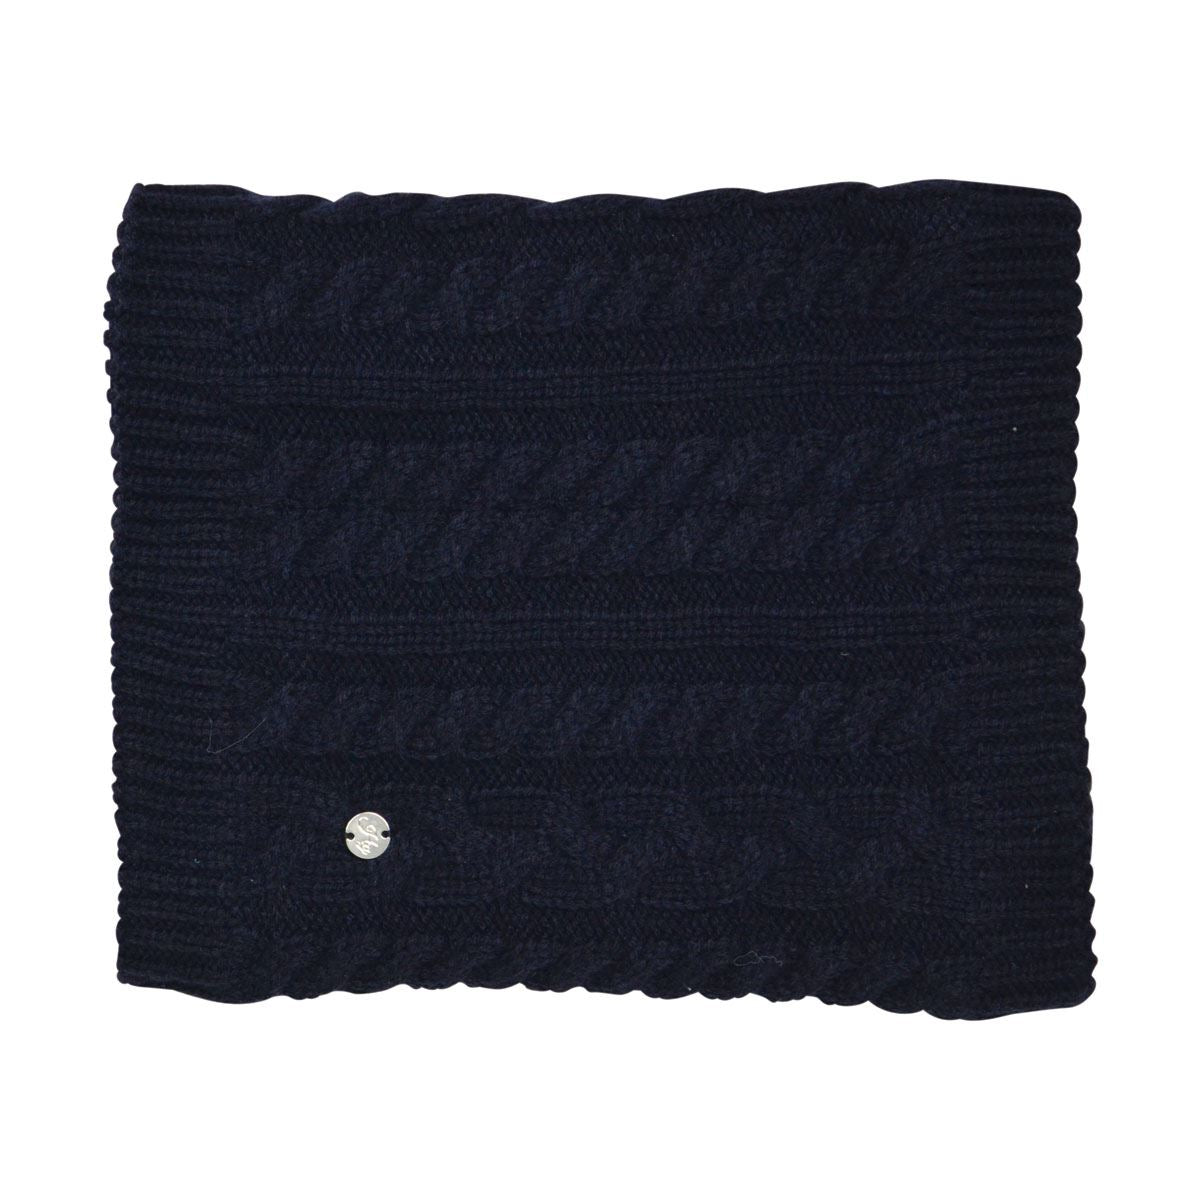 Hy Equestrian Meribel Cable Knit Snood - Just Horse Riders